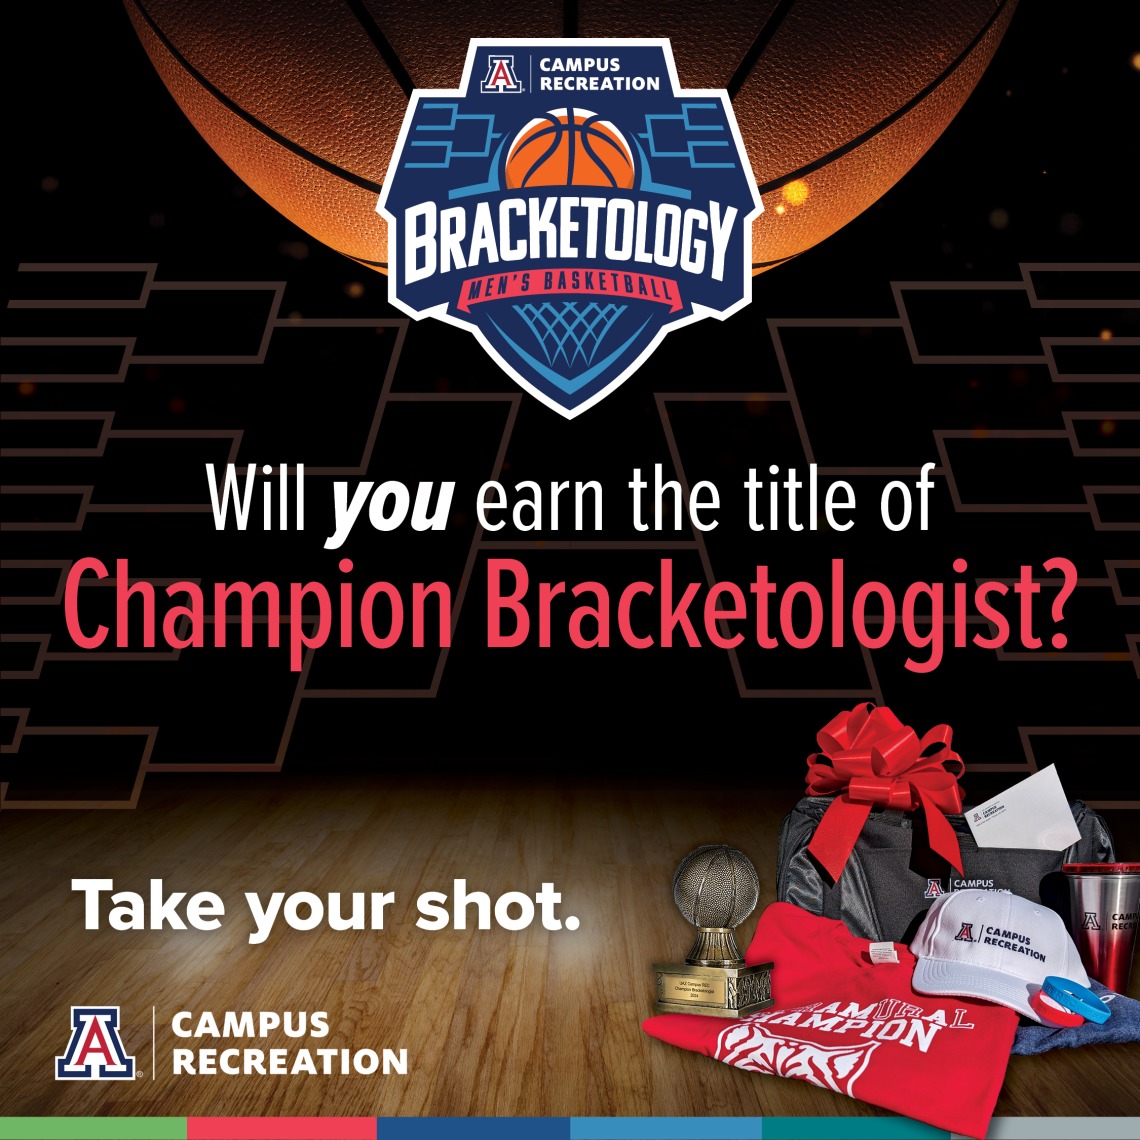 Will you earn the title of Champion Bracketologist?